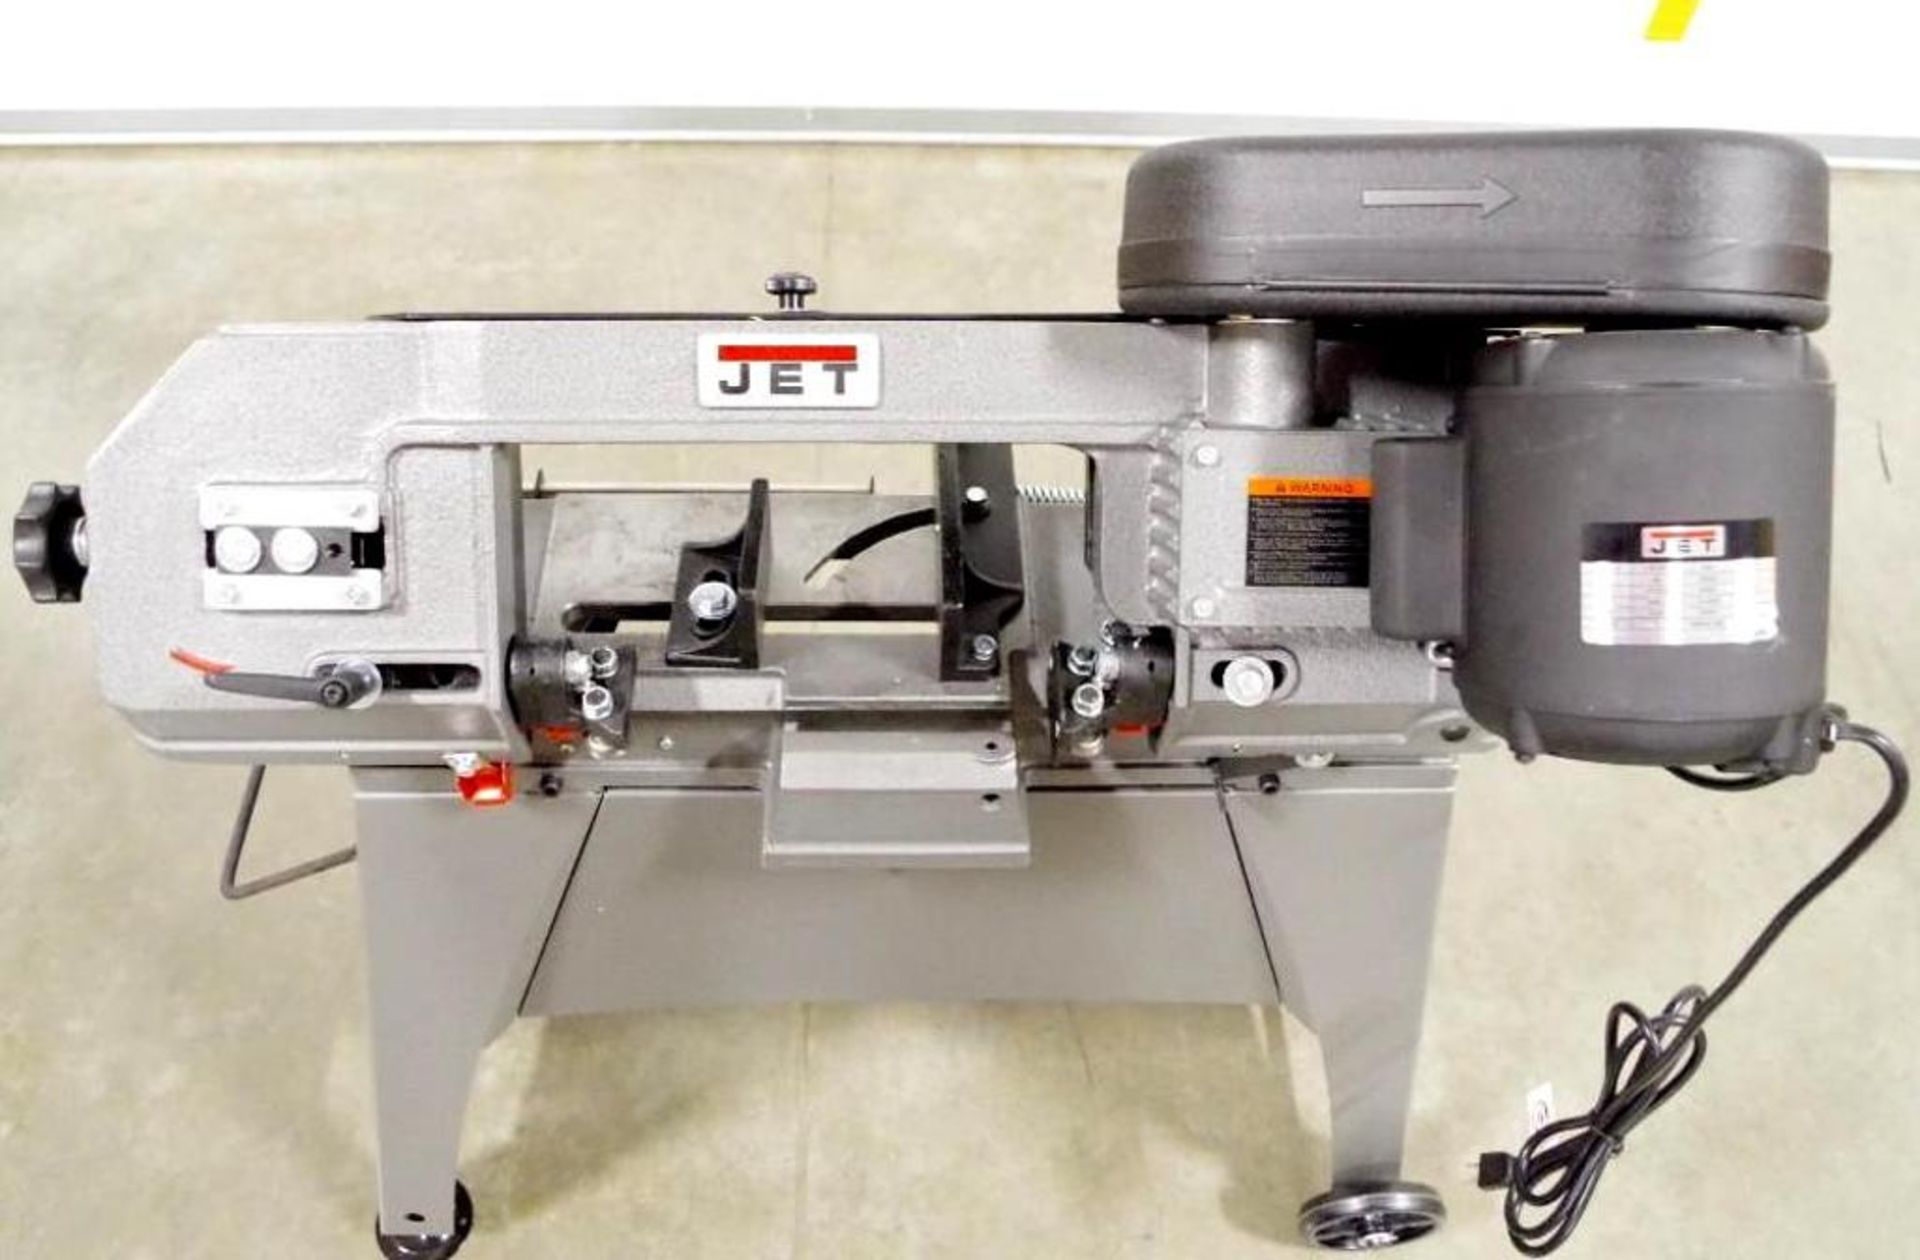 JET 5x6 Horizontal/Vertical Bandsaw w/ 3-Speed Step Pulley - Image 3 of 7